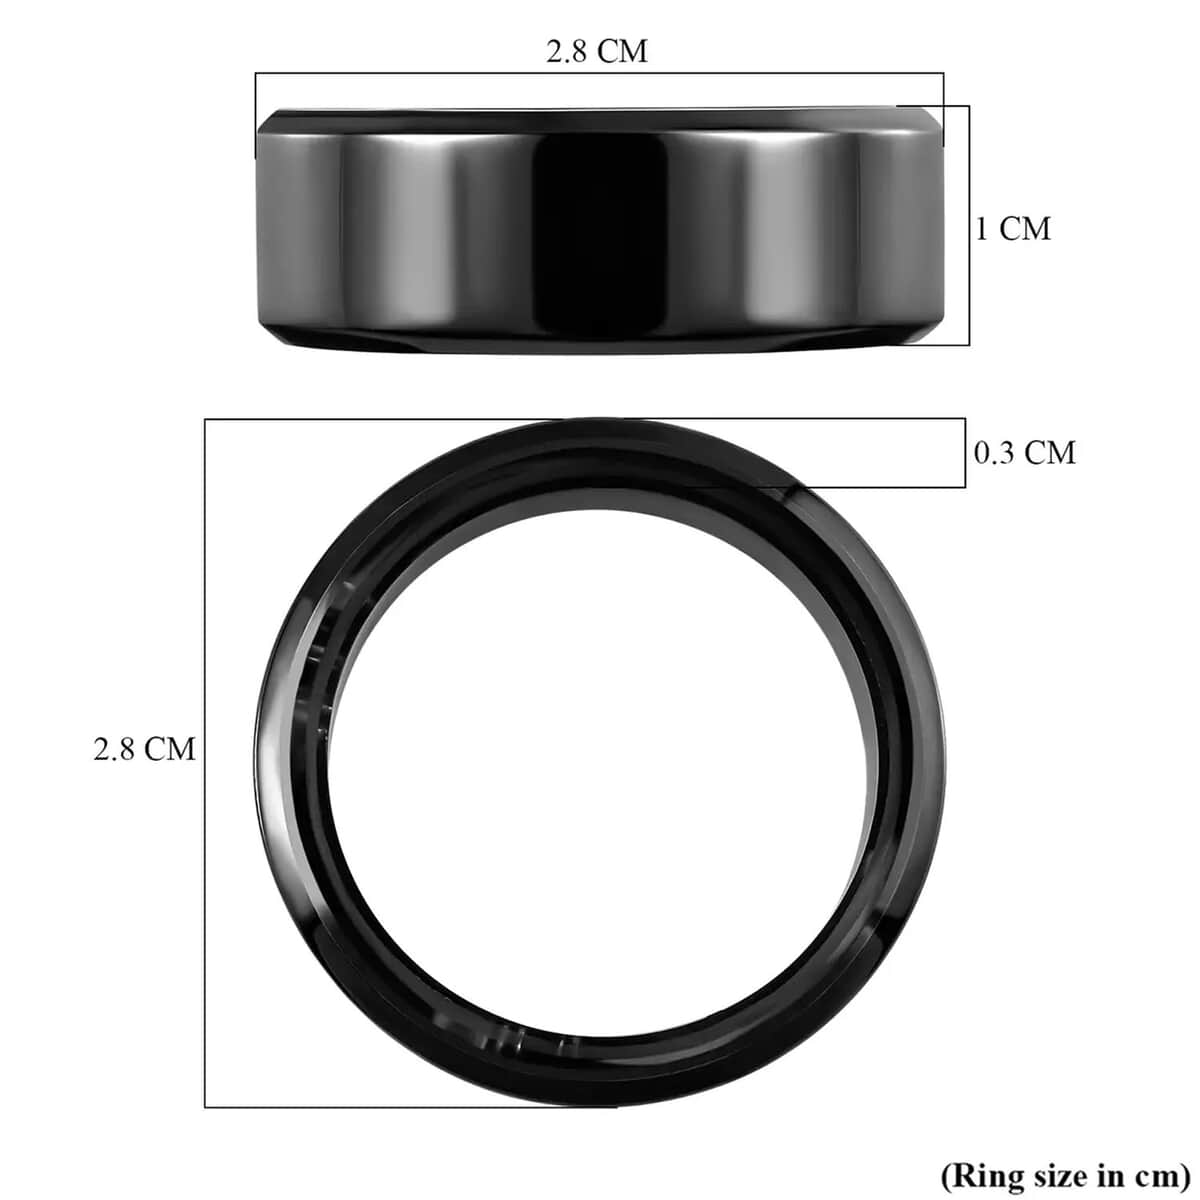 Soulsmart Multifunctional Health Tracker Smart Ring (Size 11.0) in ION Plated Black Stainless Steel (Compatible with Android 5.0+ & Apple IOS 10.0+ Systems) (Del. in 10-15 Days) image number 7